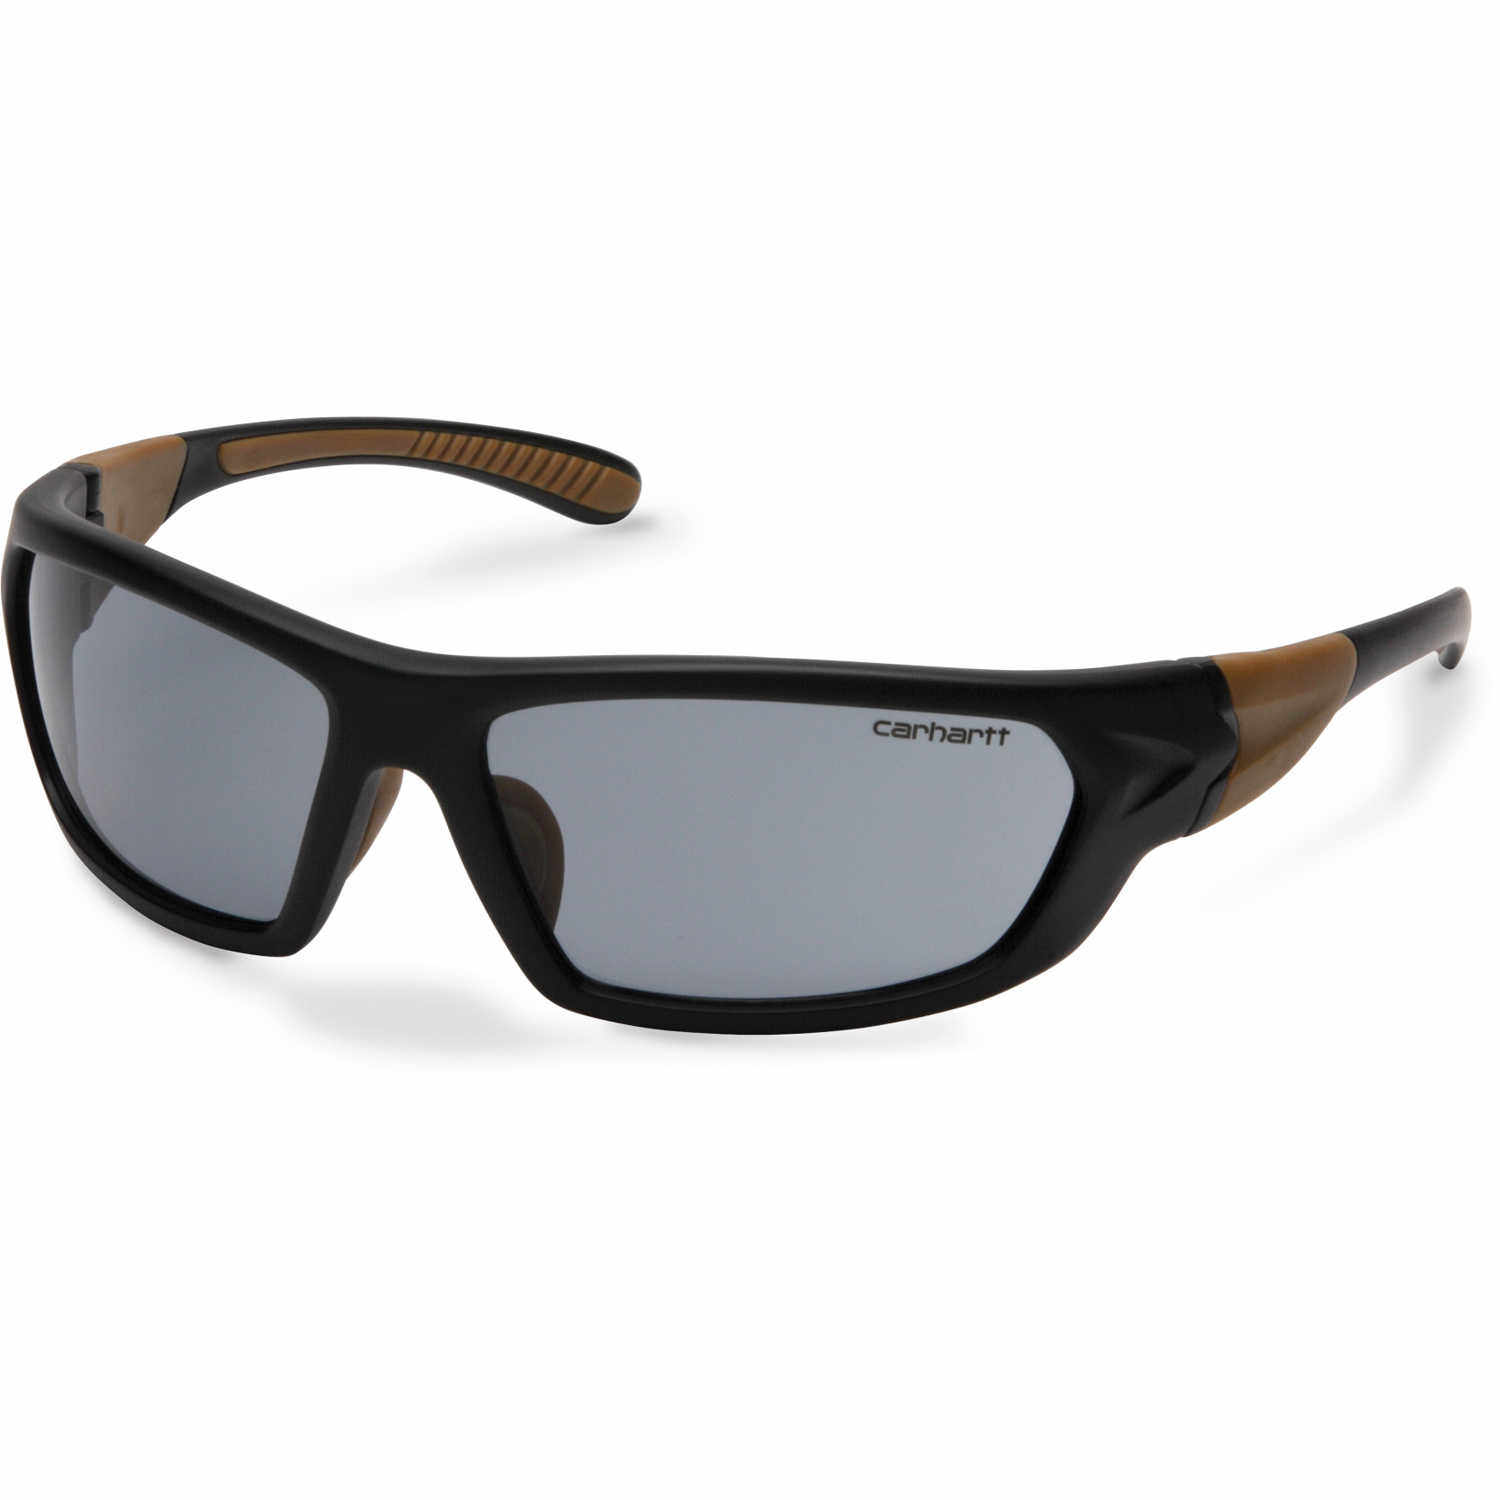 Carhartt Carbondale Safety Glasses with Black/Tan Frame Sunglasses Choose Color 